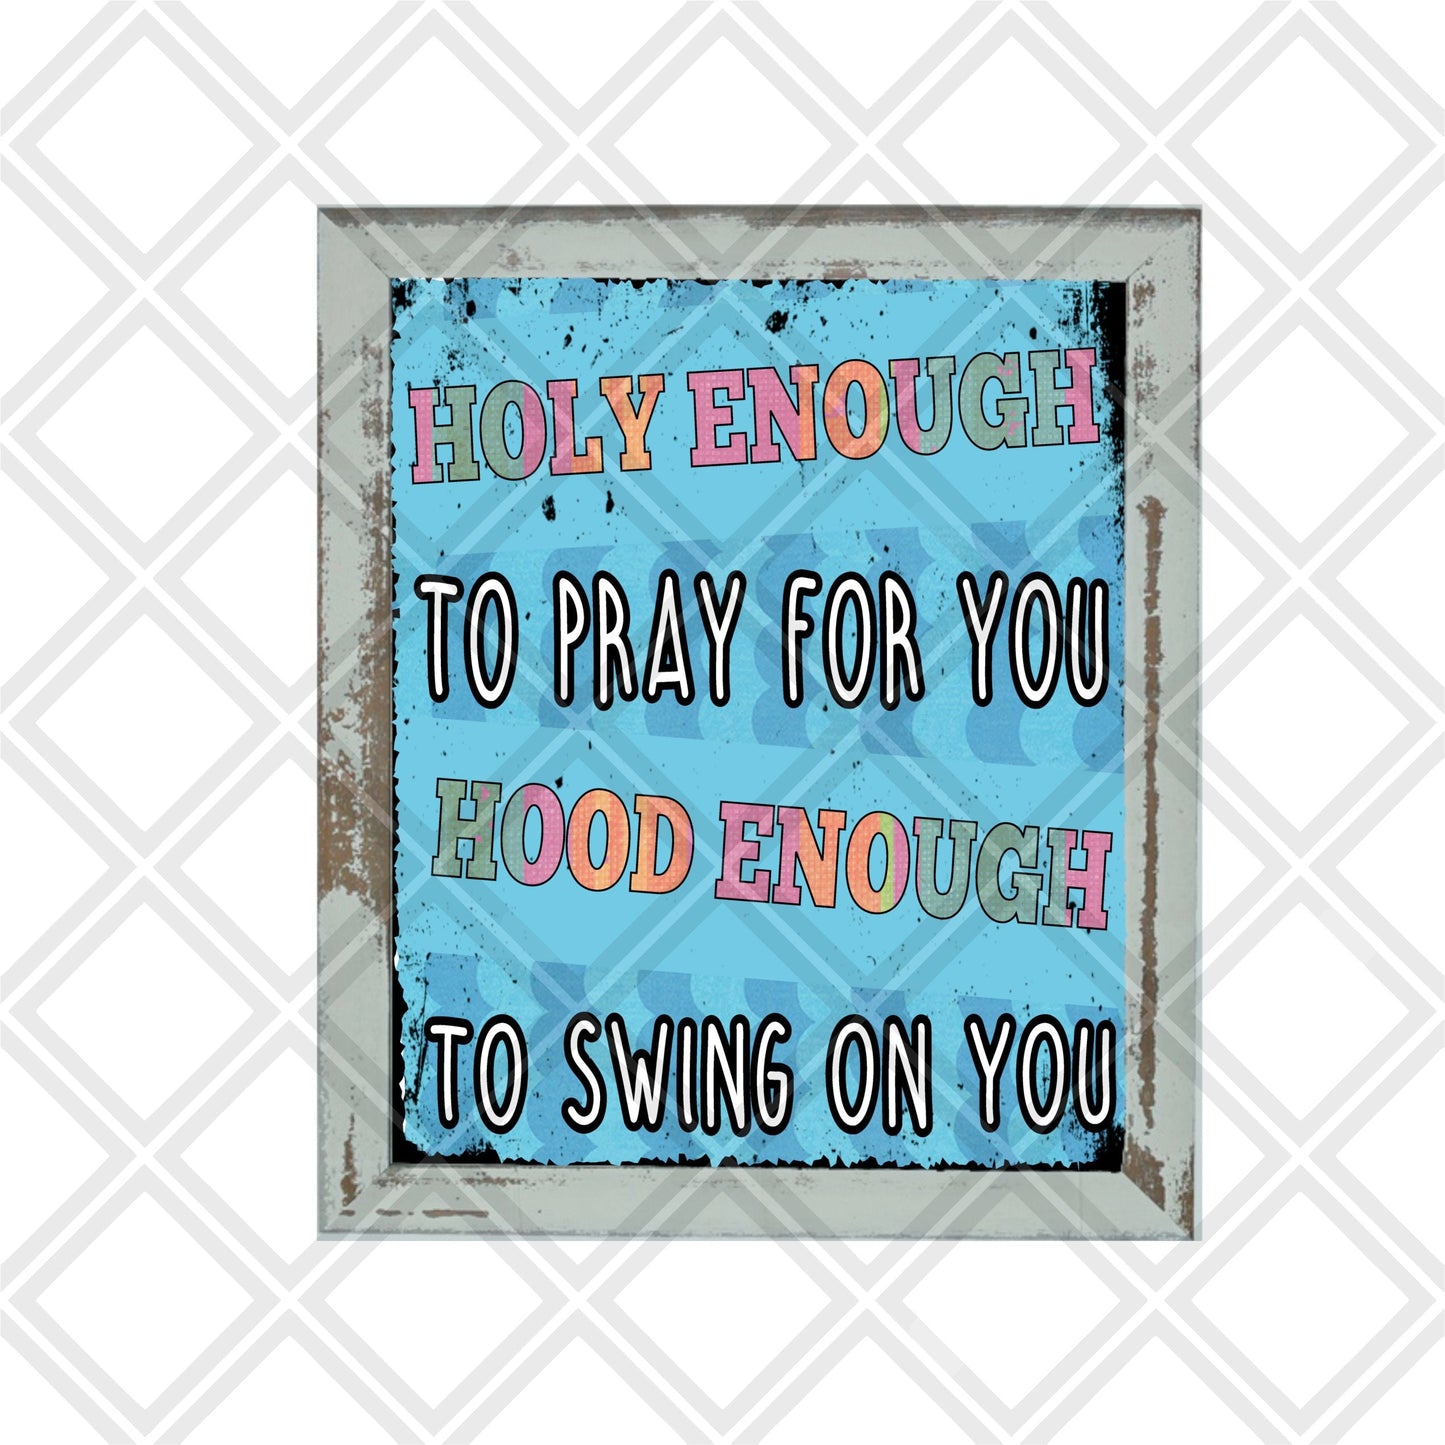 Holy enough to pray for you hood enough to swing on you DTF TRANSFERPRINT TO ORDER